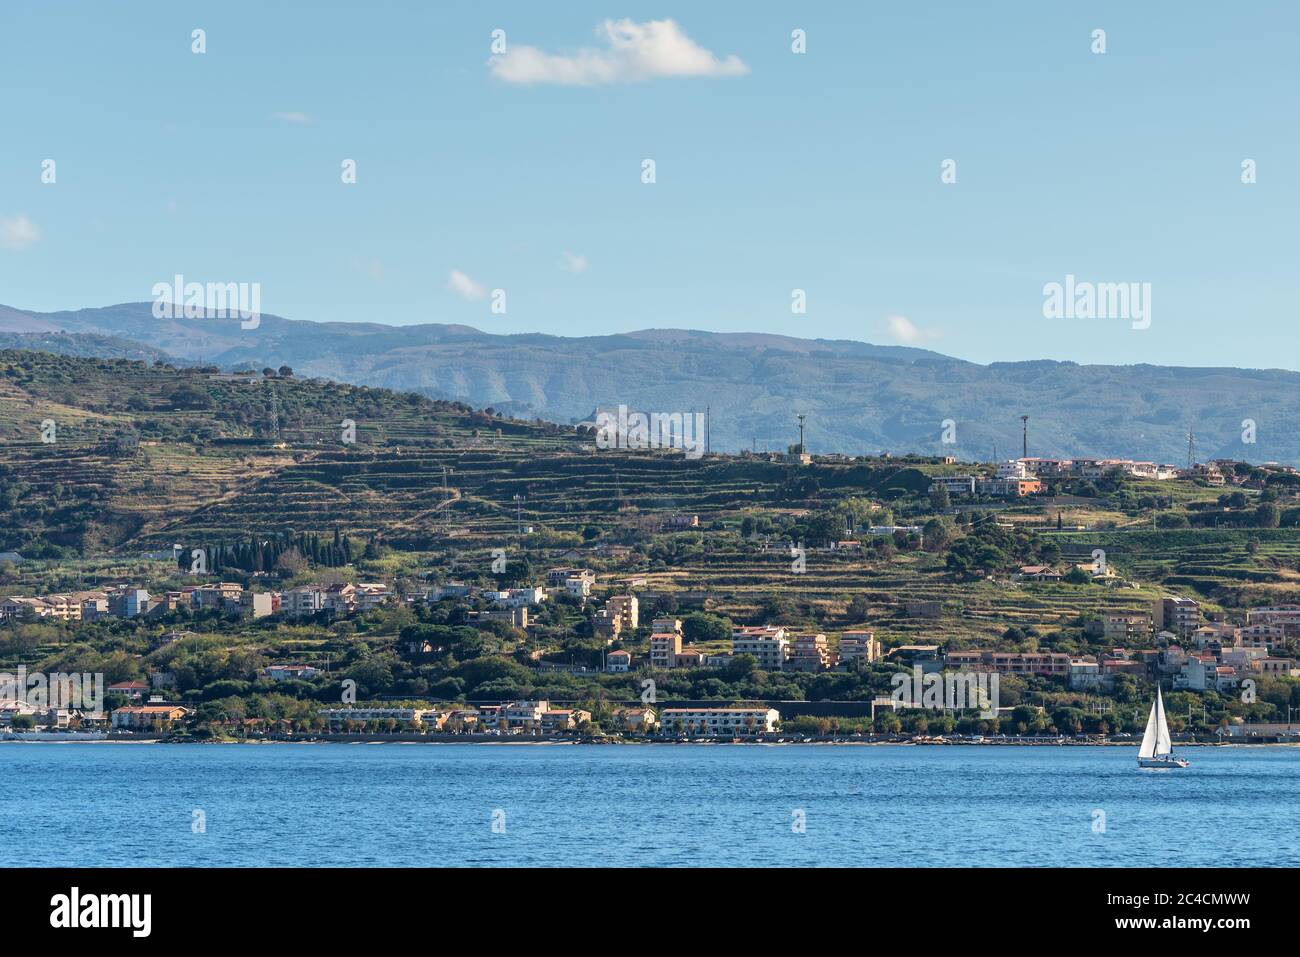 The Strait of Messina connected Mediterranean and Tyrrhenian sea and Sicilia island with blue sky and coast as background, view from promenade quay wa Stock Photo